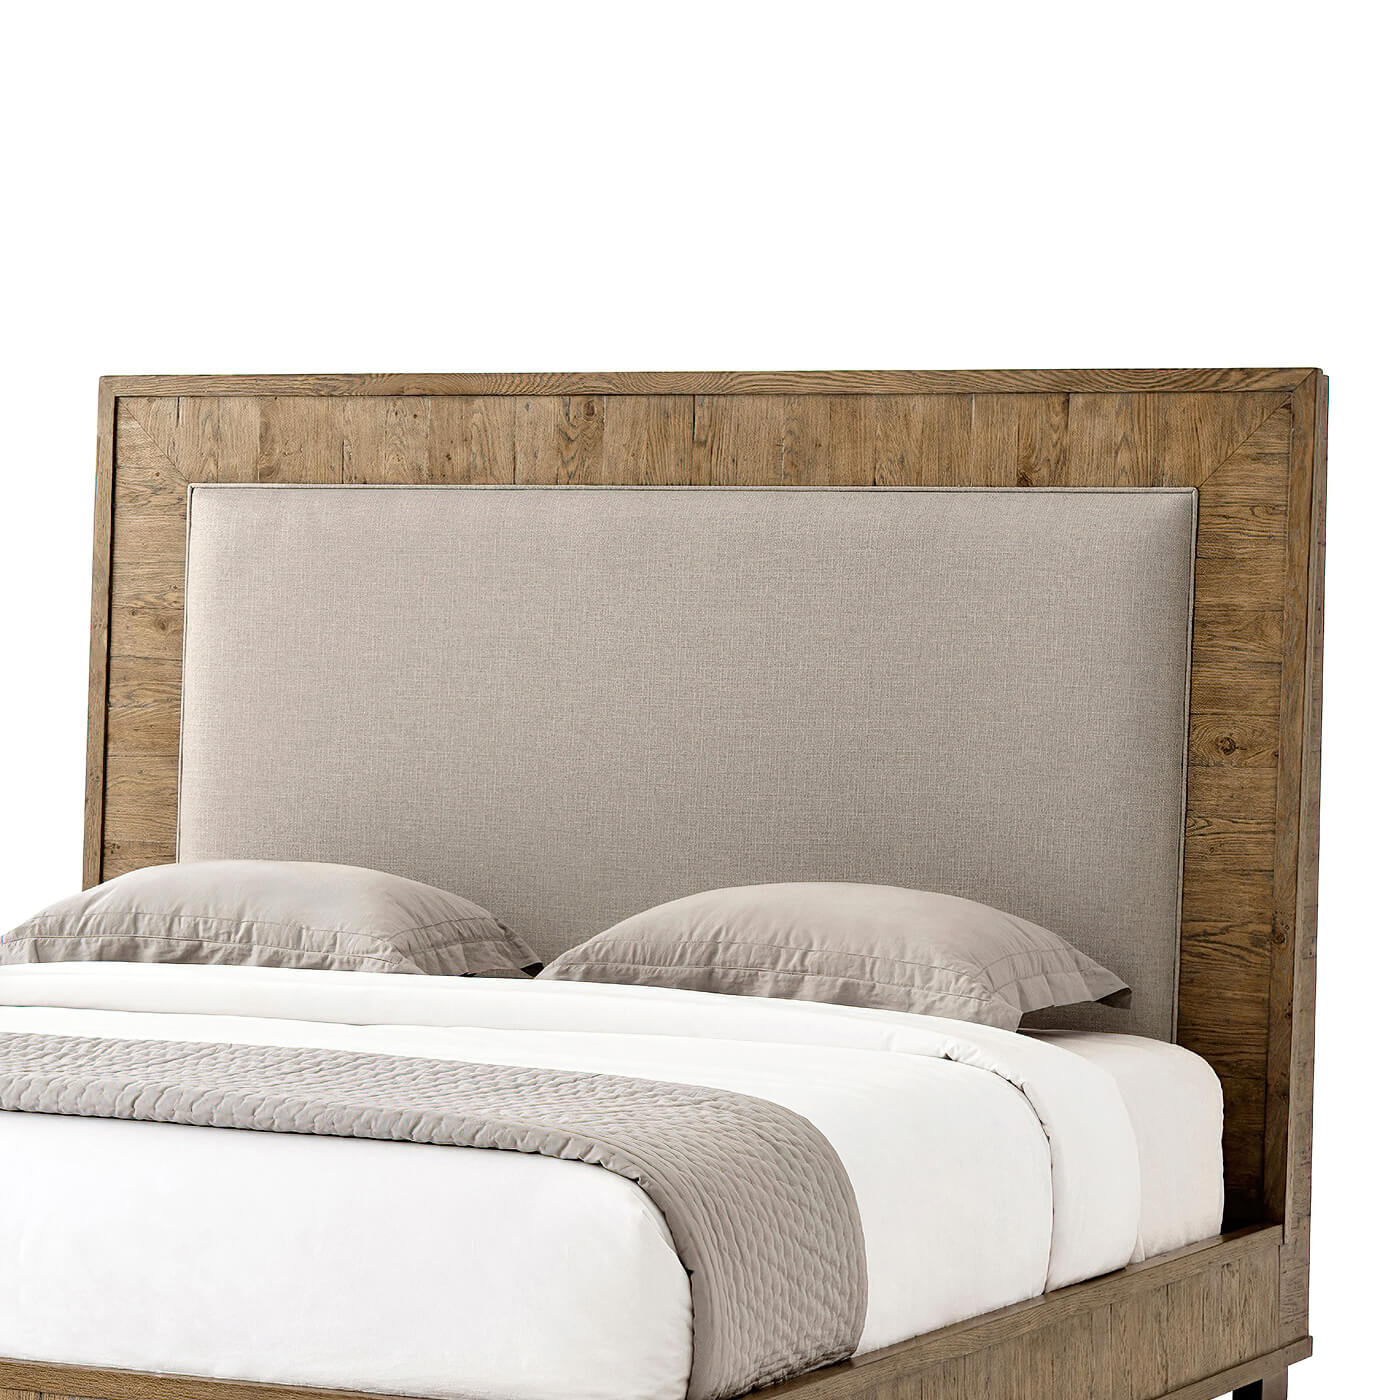 Rustic Parquetry King Size Bed - English Georgian America